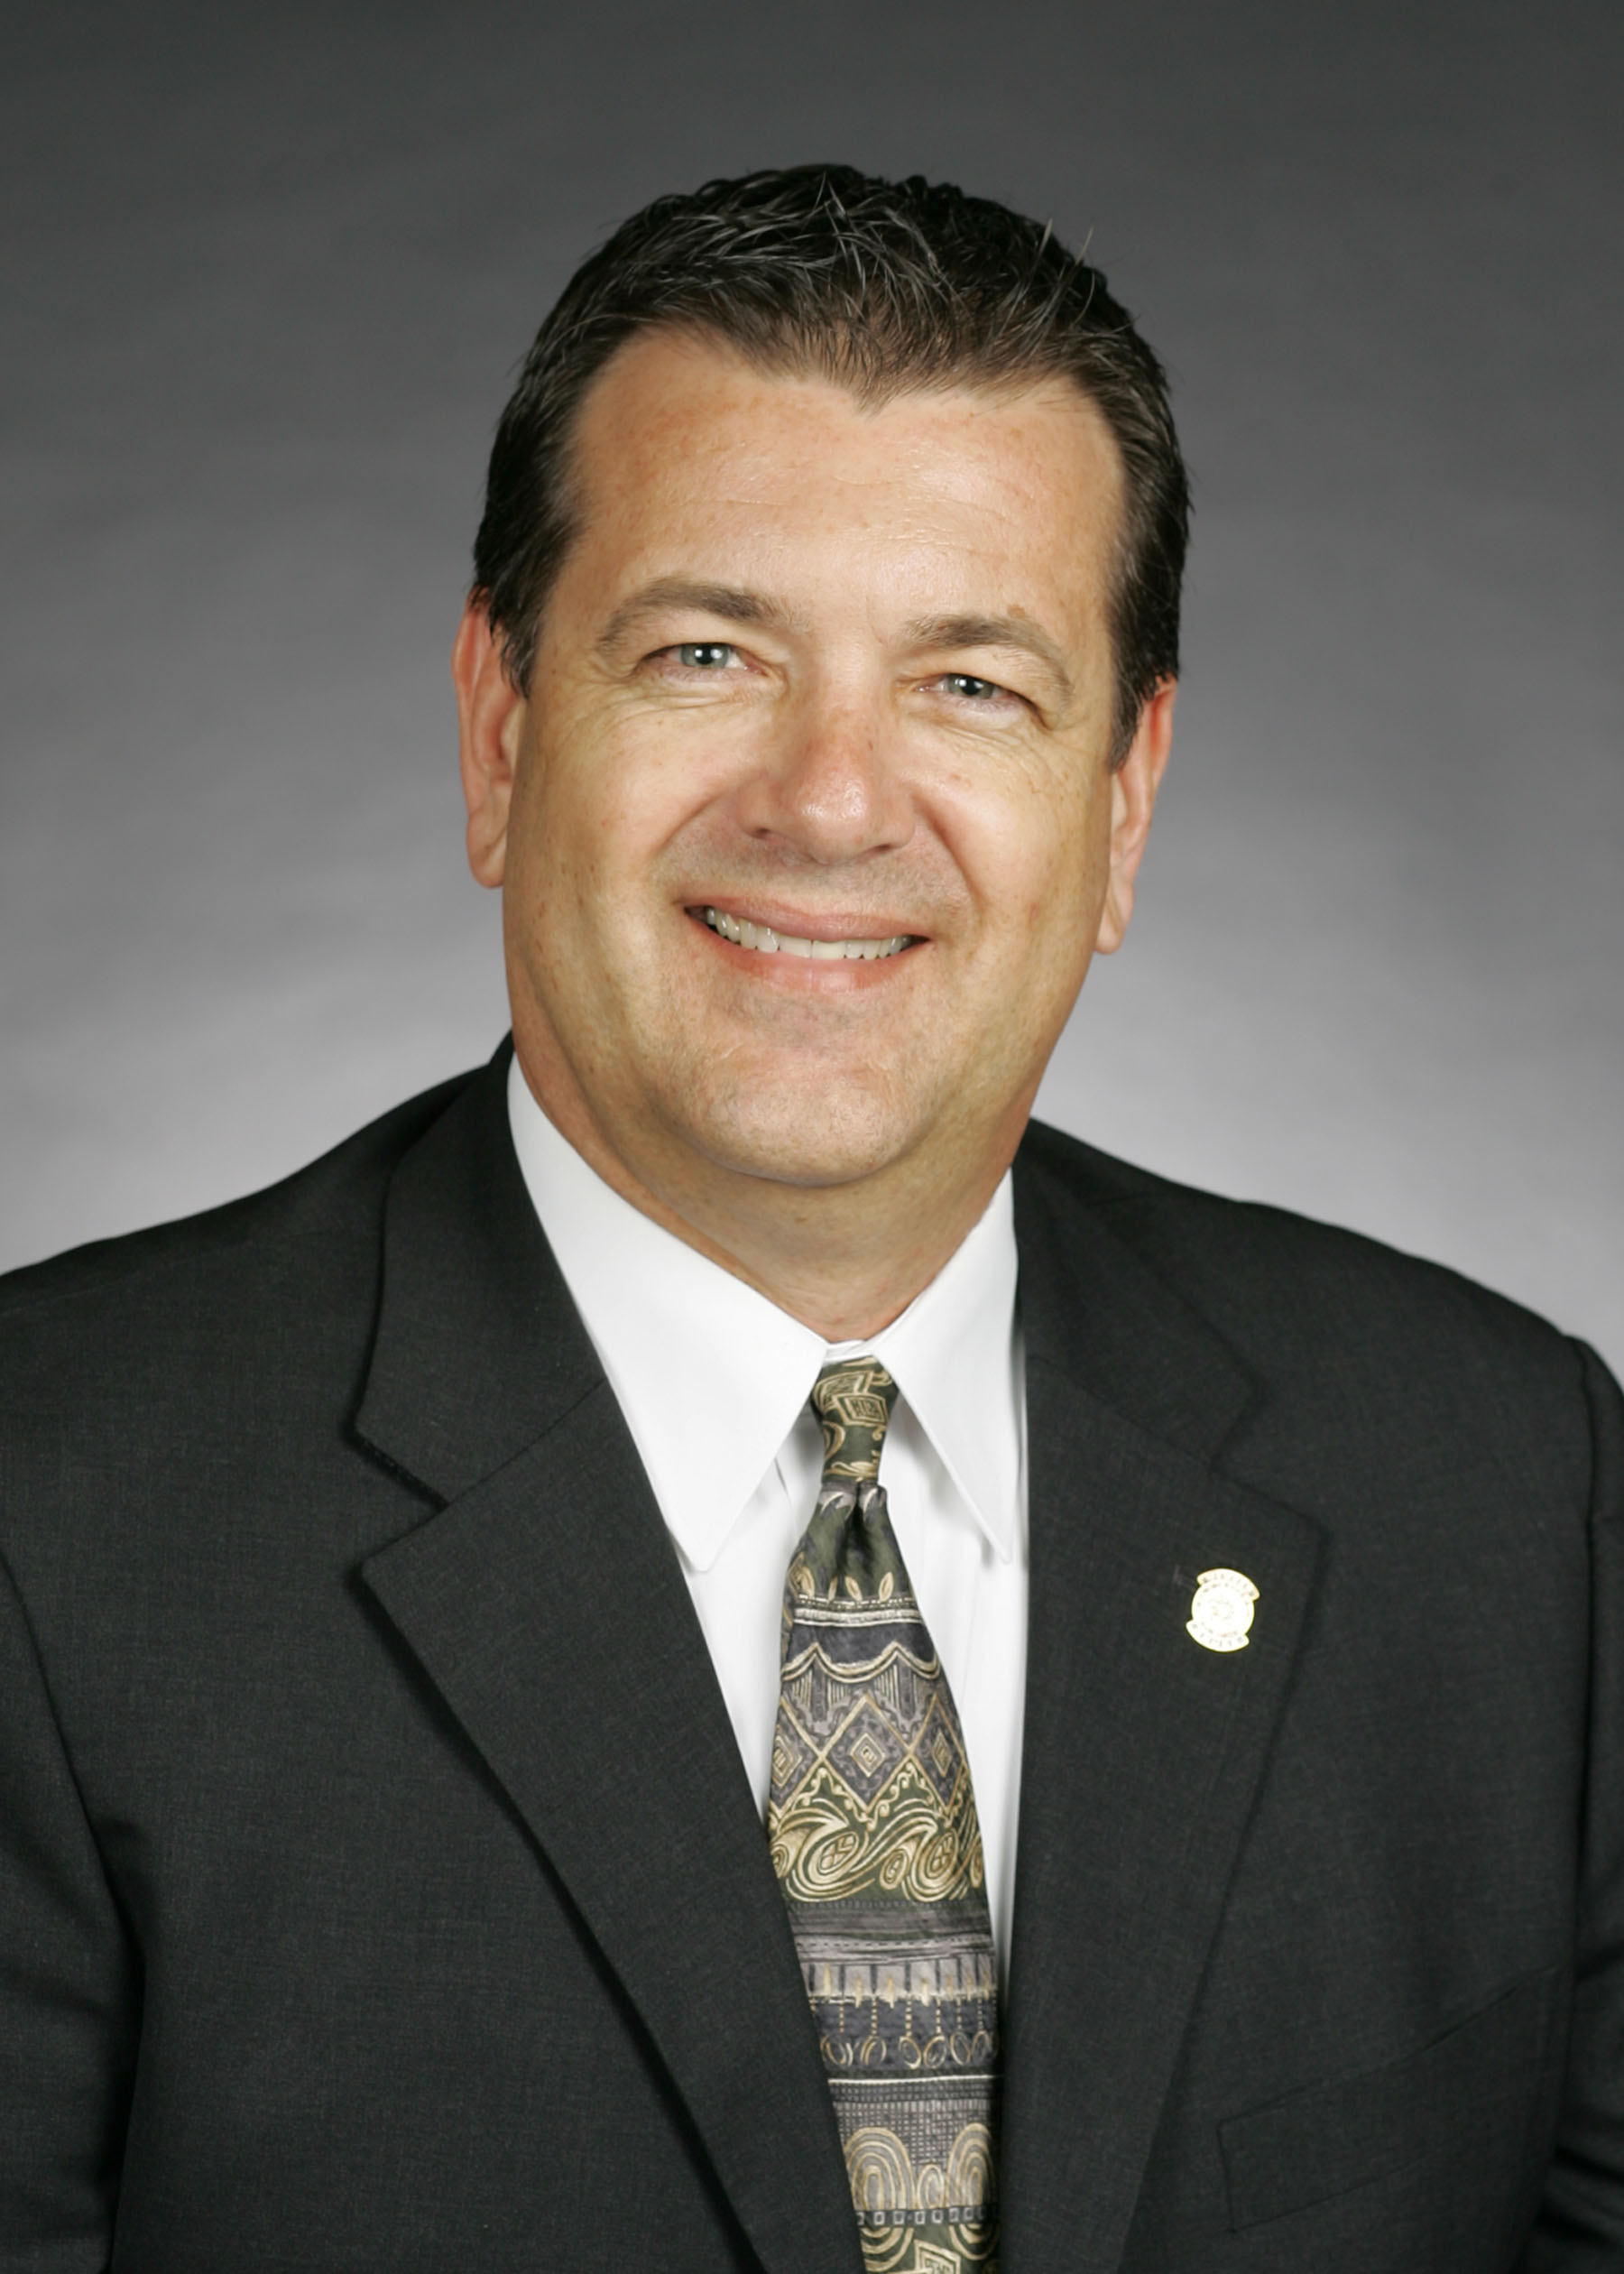 Lawmaker Dan Kirby submits resignation following harassment accusations